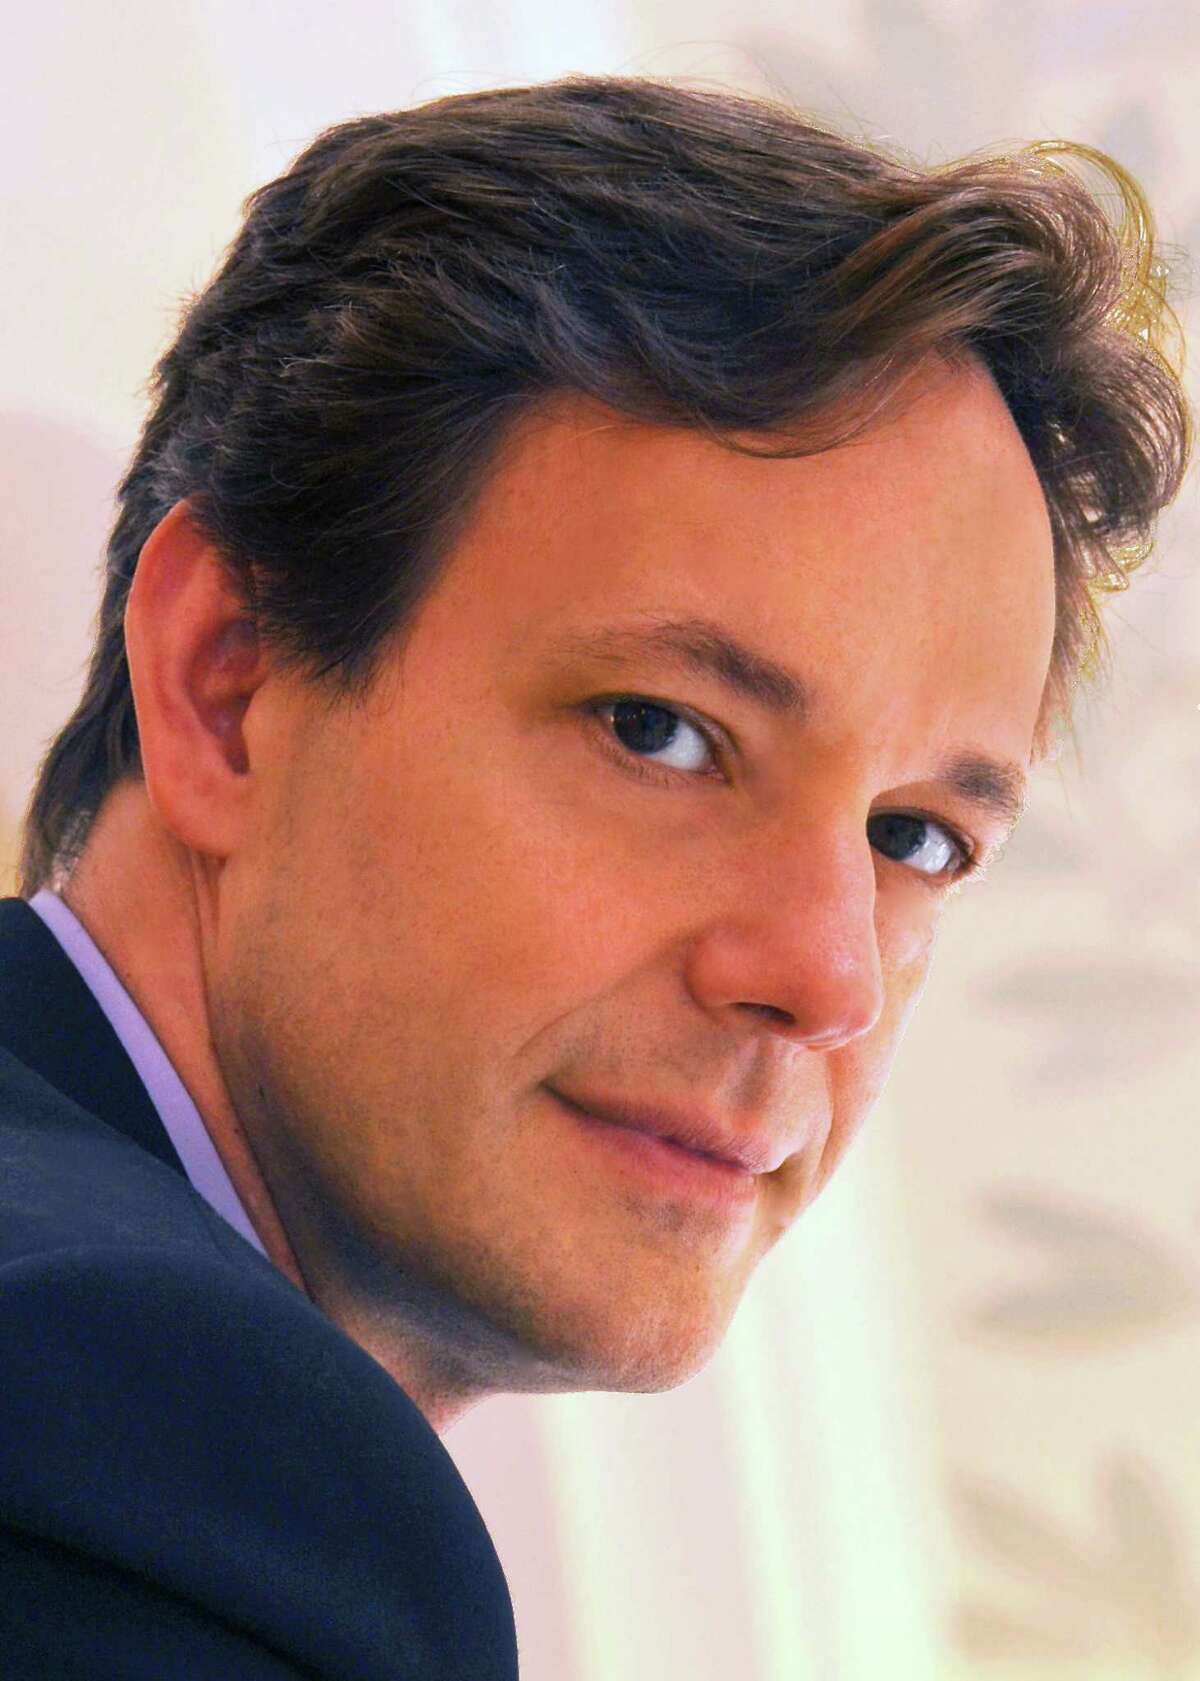 Composer and pianist Jake Heggie